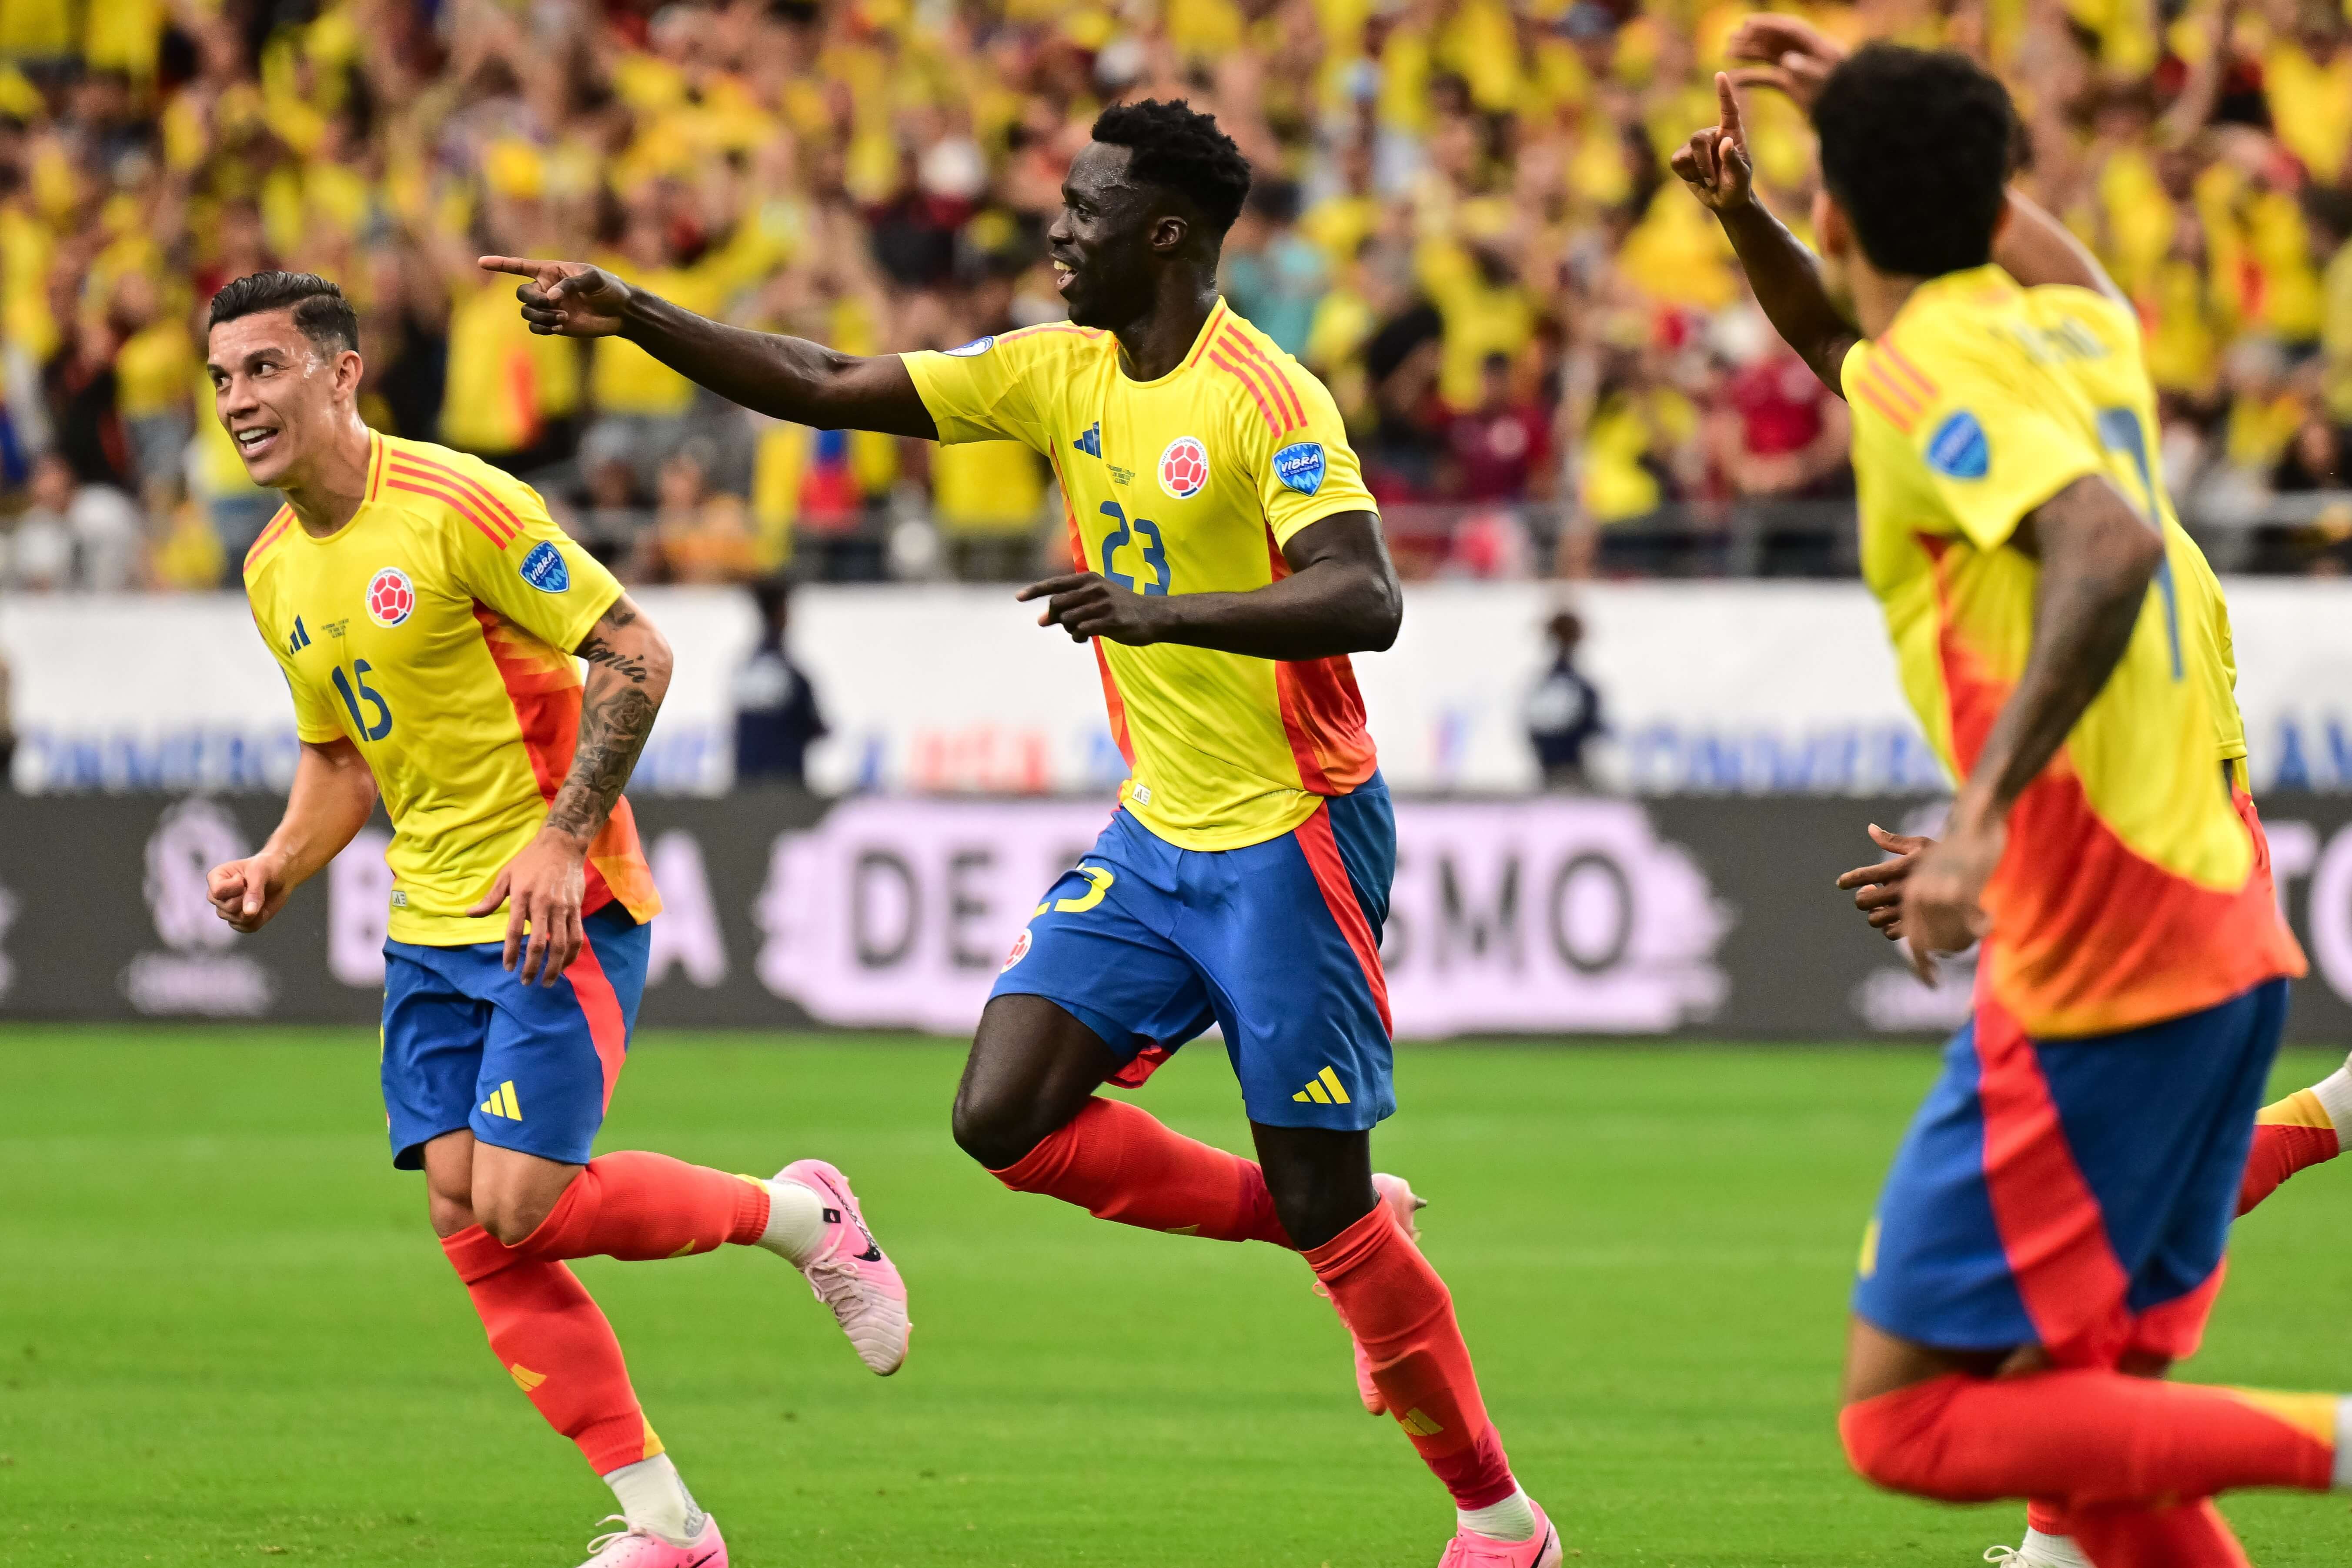 How To Bet - Colombia vs Panama Odds, Picks & Predictions: Sanchez Keeps Shooting in Copa America Quarterfinal